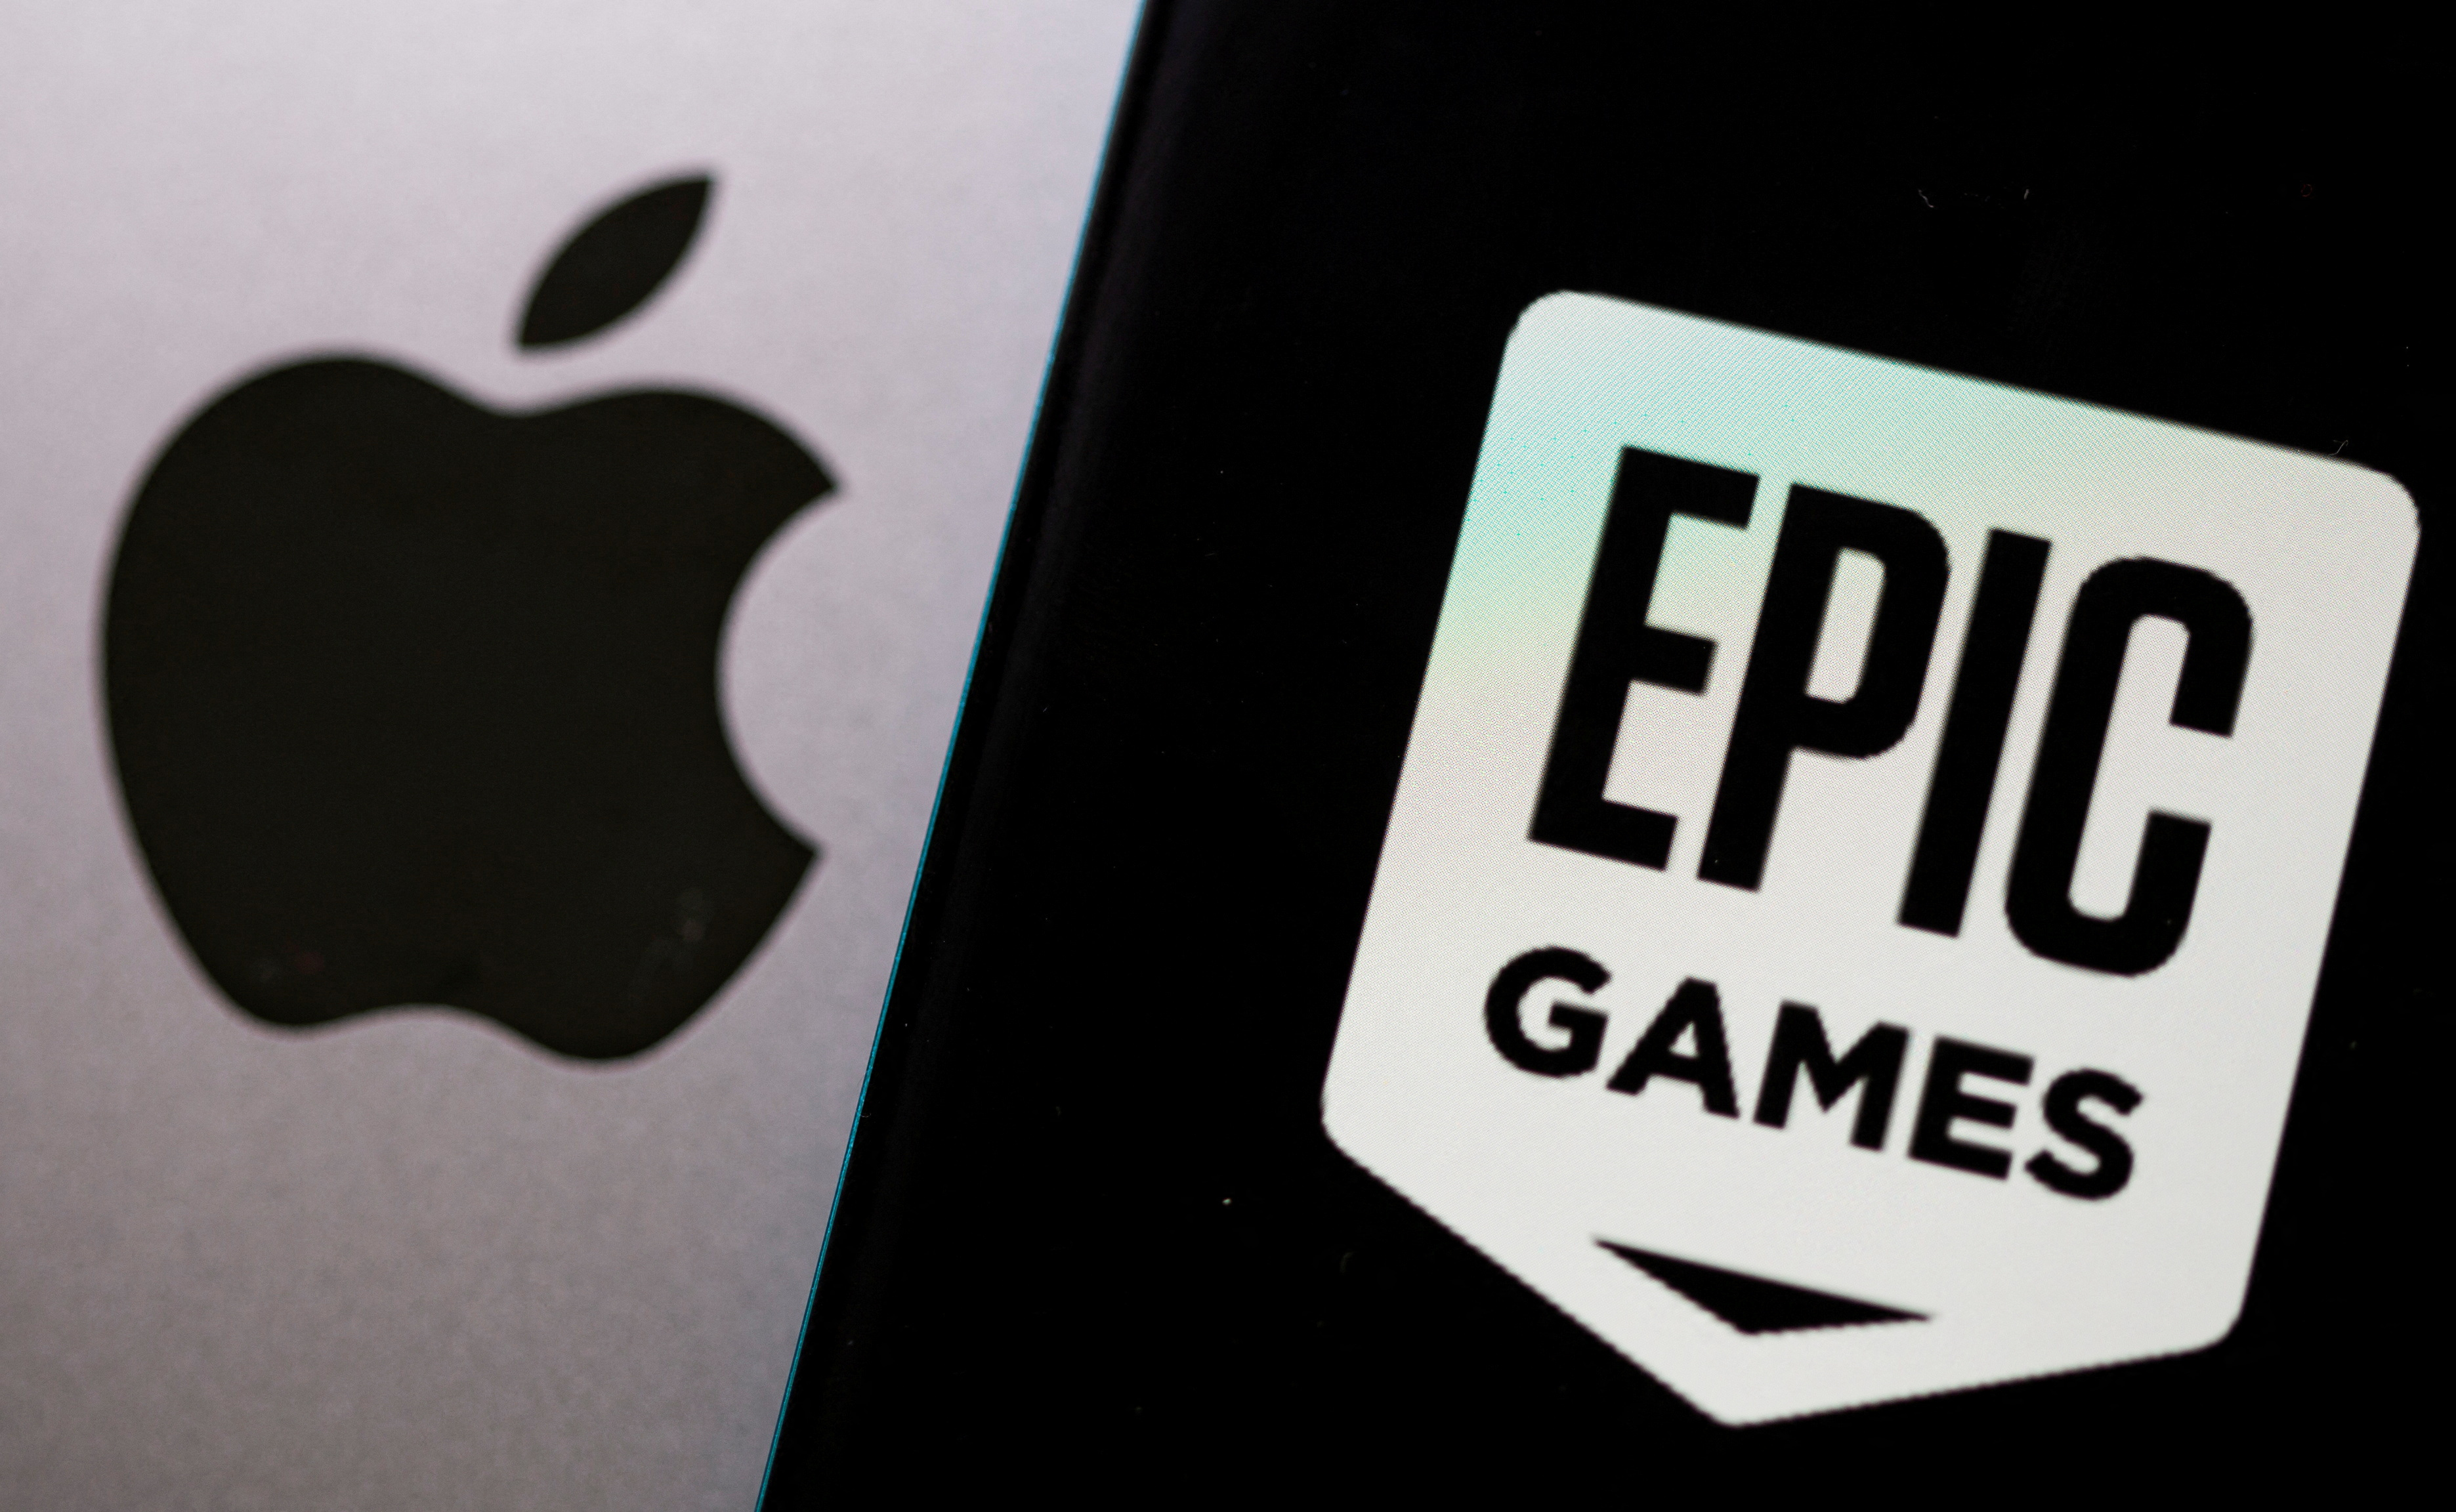 Smartphone with Epic Games logo is seen in front of Apple logo in this illustration taken